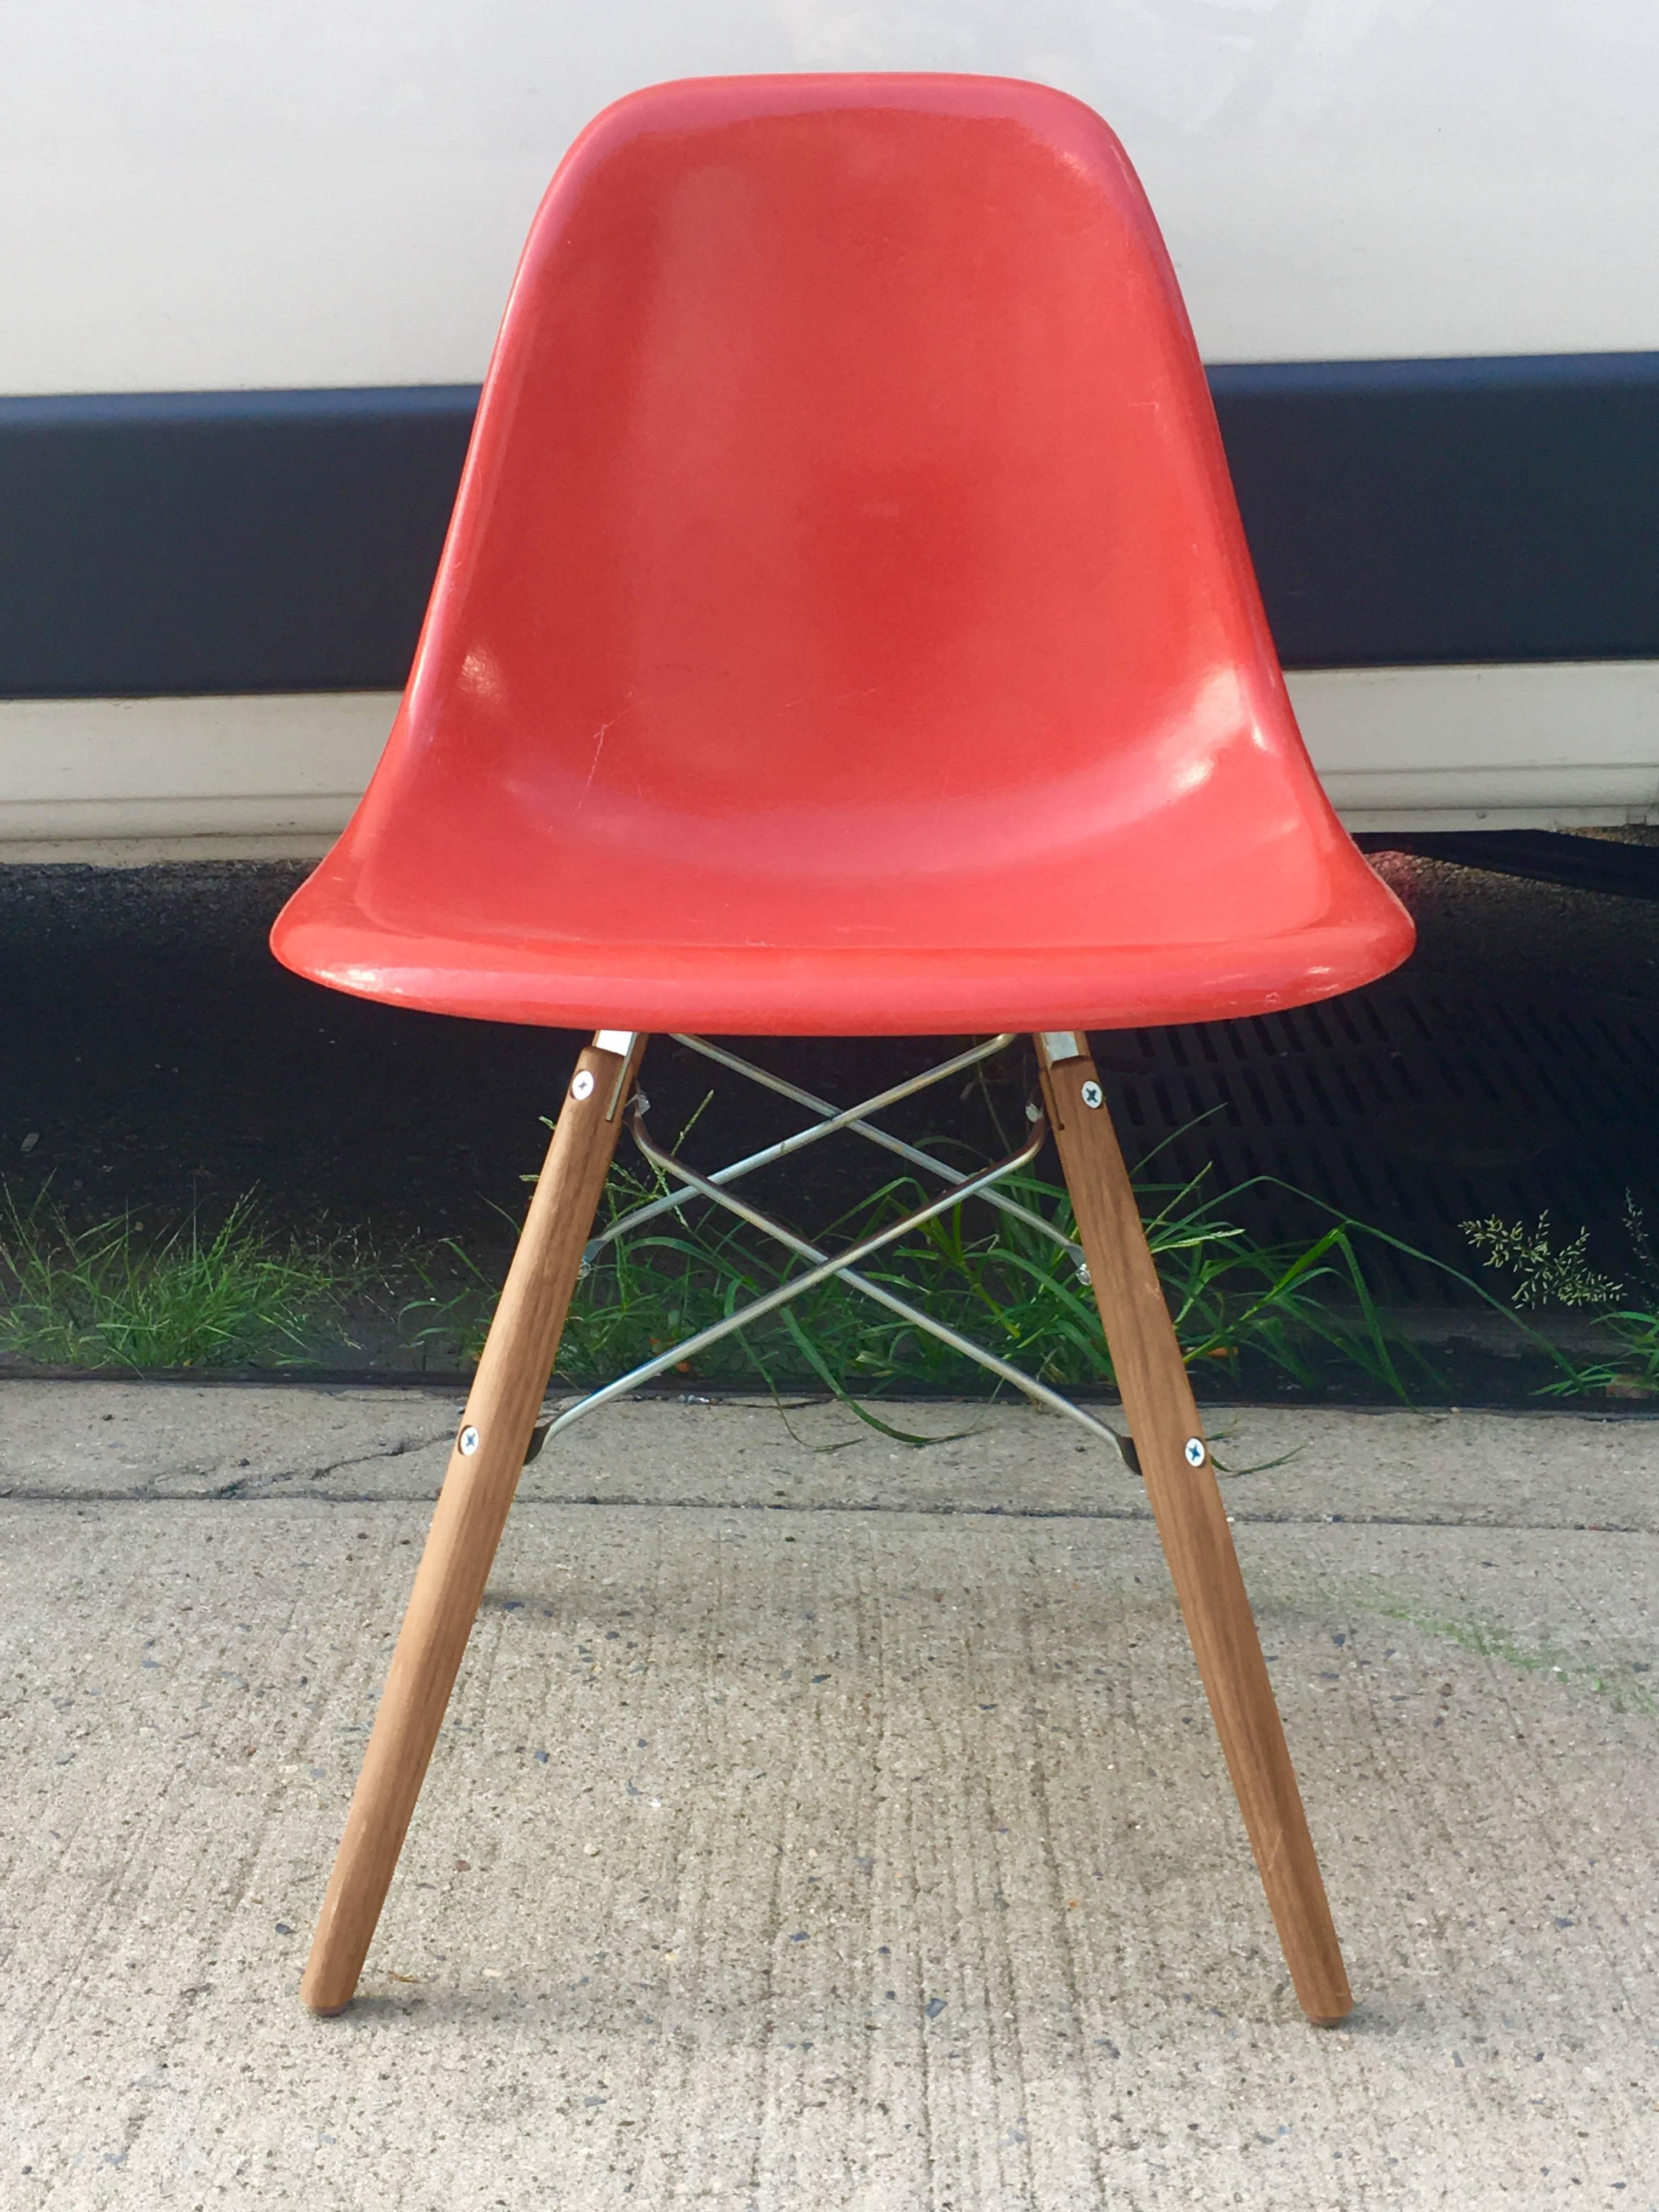 Six multicolored Herman Miller Eames dining chairs on new walnut stained bases. In good condition. One chair with crack along rim. Two red orange, one elephant grey, one cream, one tan, one light yellow. Colors of shells and wooden legs may differ